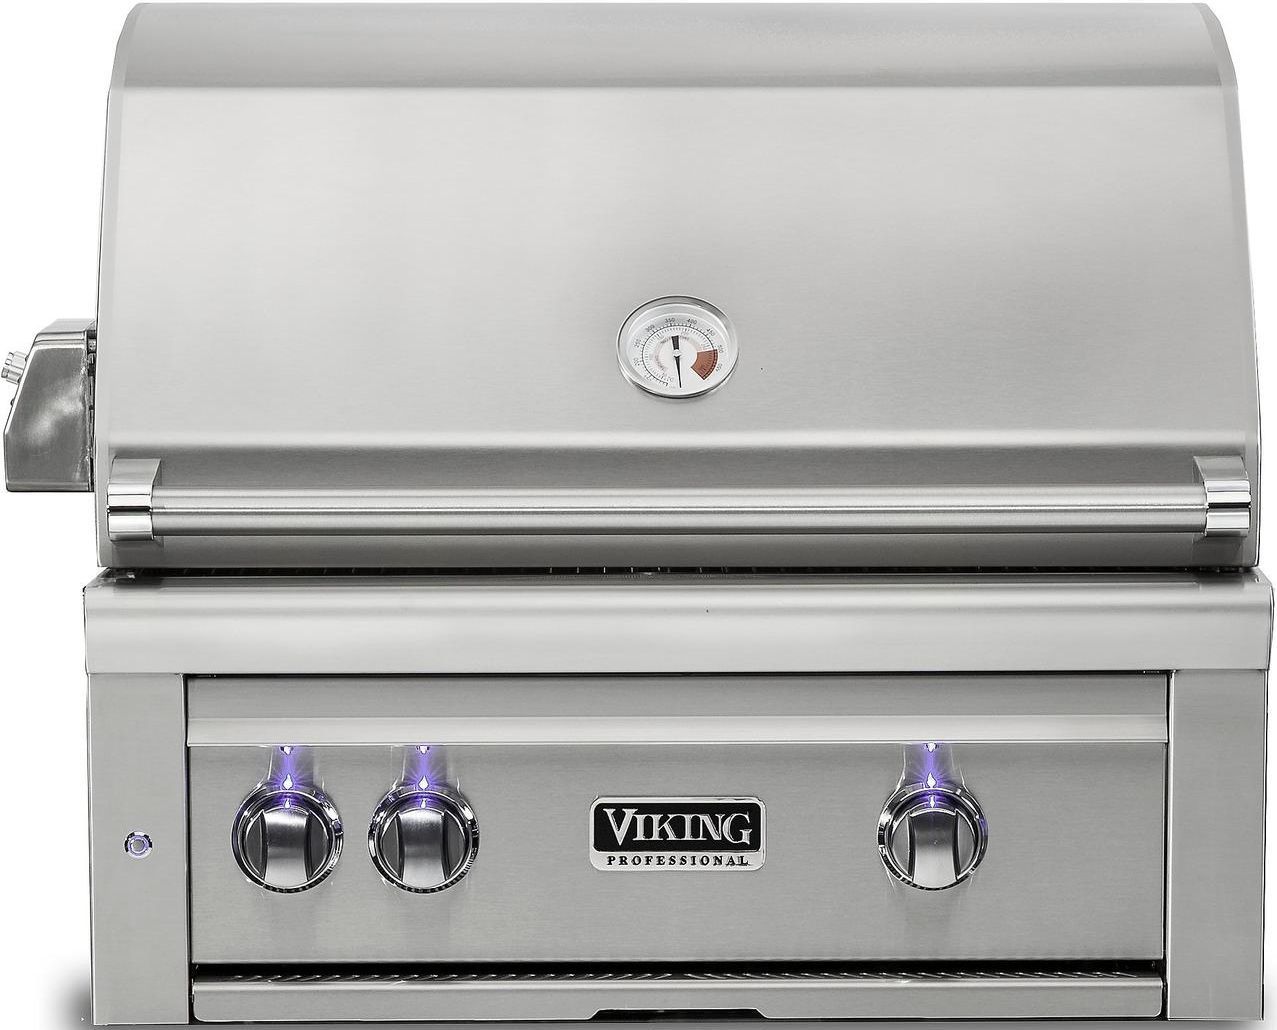 Viking® Professional 5 Series 30" Built-In Grill-Stainless Steel